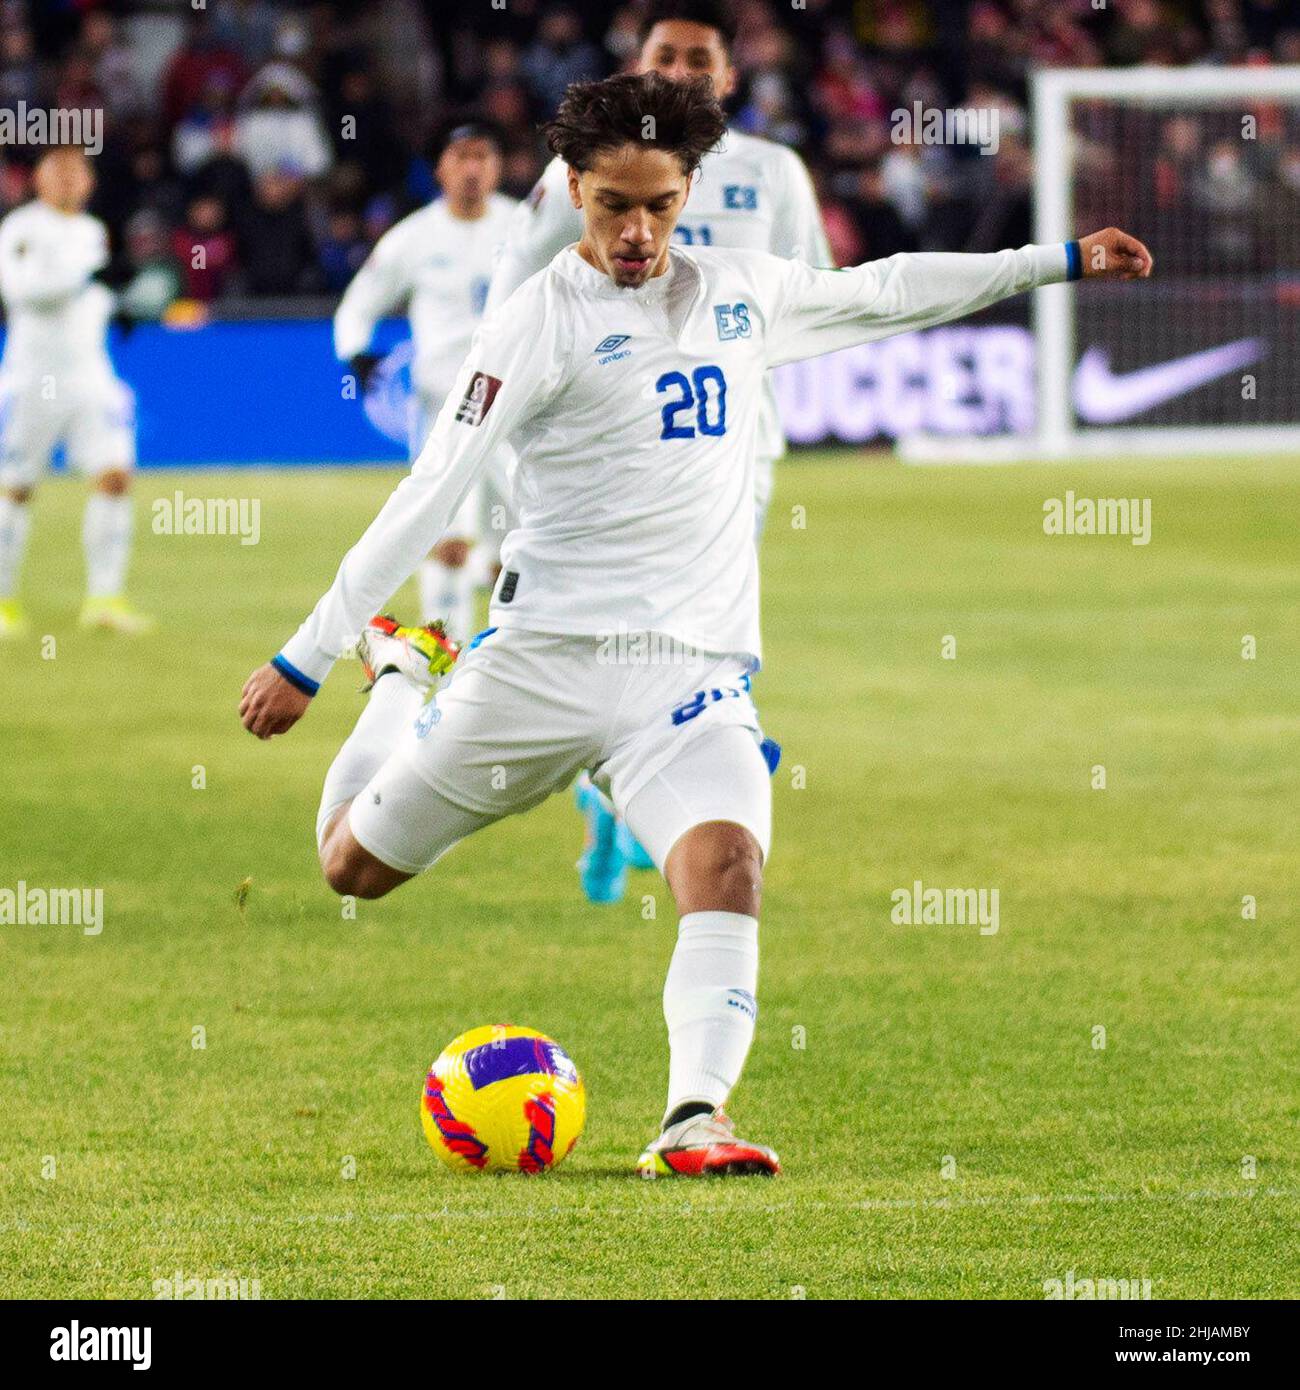 Columbus, Ohio, USA. 27th Jan, 2022. El Salvador midfielder Enrico Hernandez (20) takes a shot on net in ther match in in Columbus, Ohio, USA. Credit: Brent Clark/Alamy Live News Stock Photo